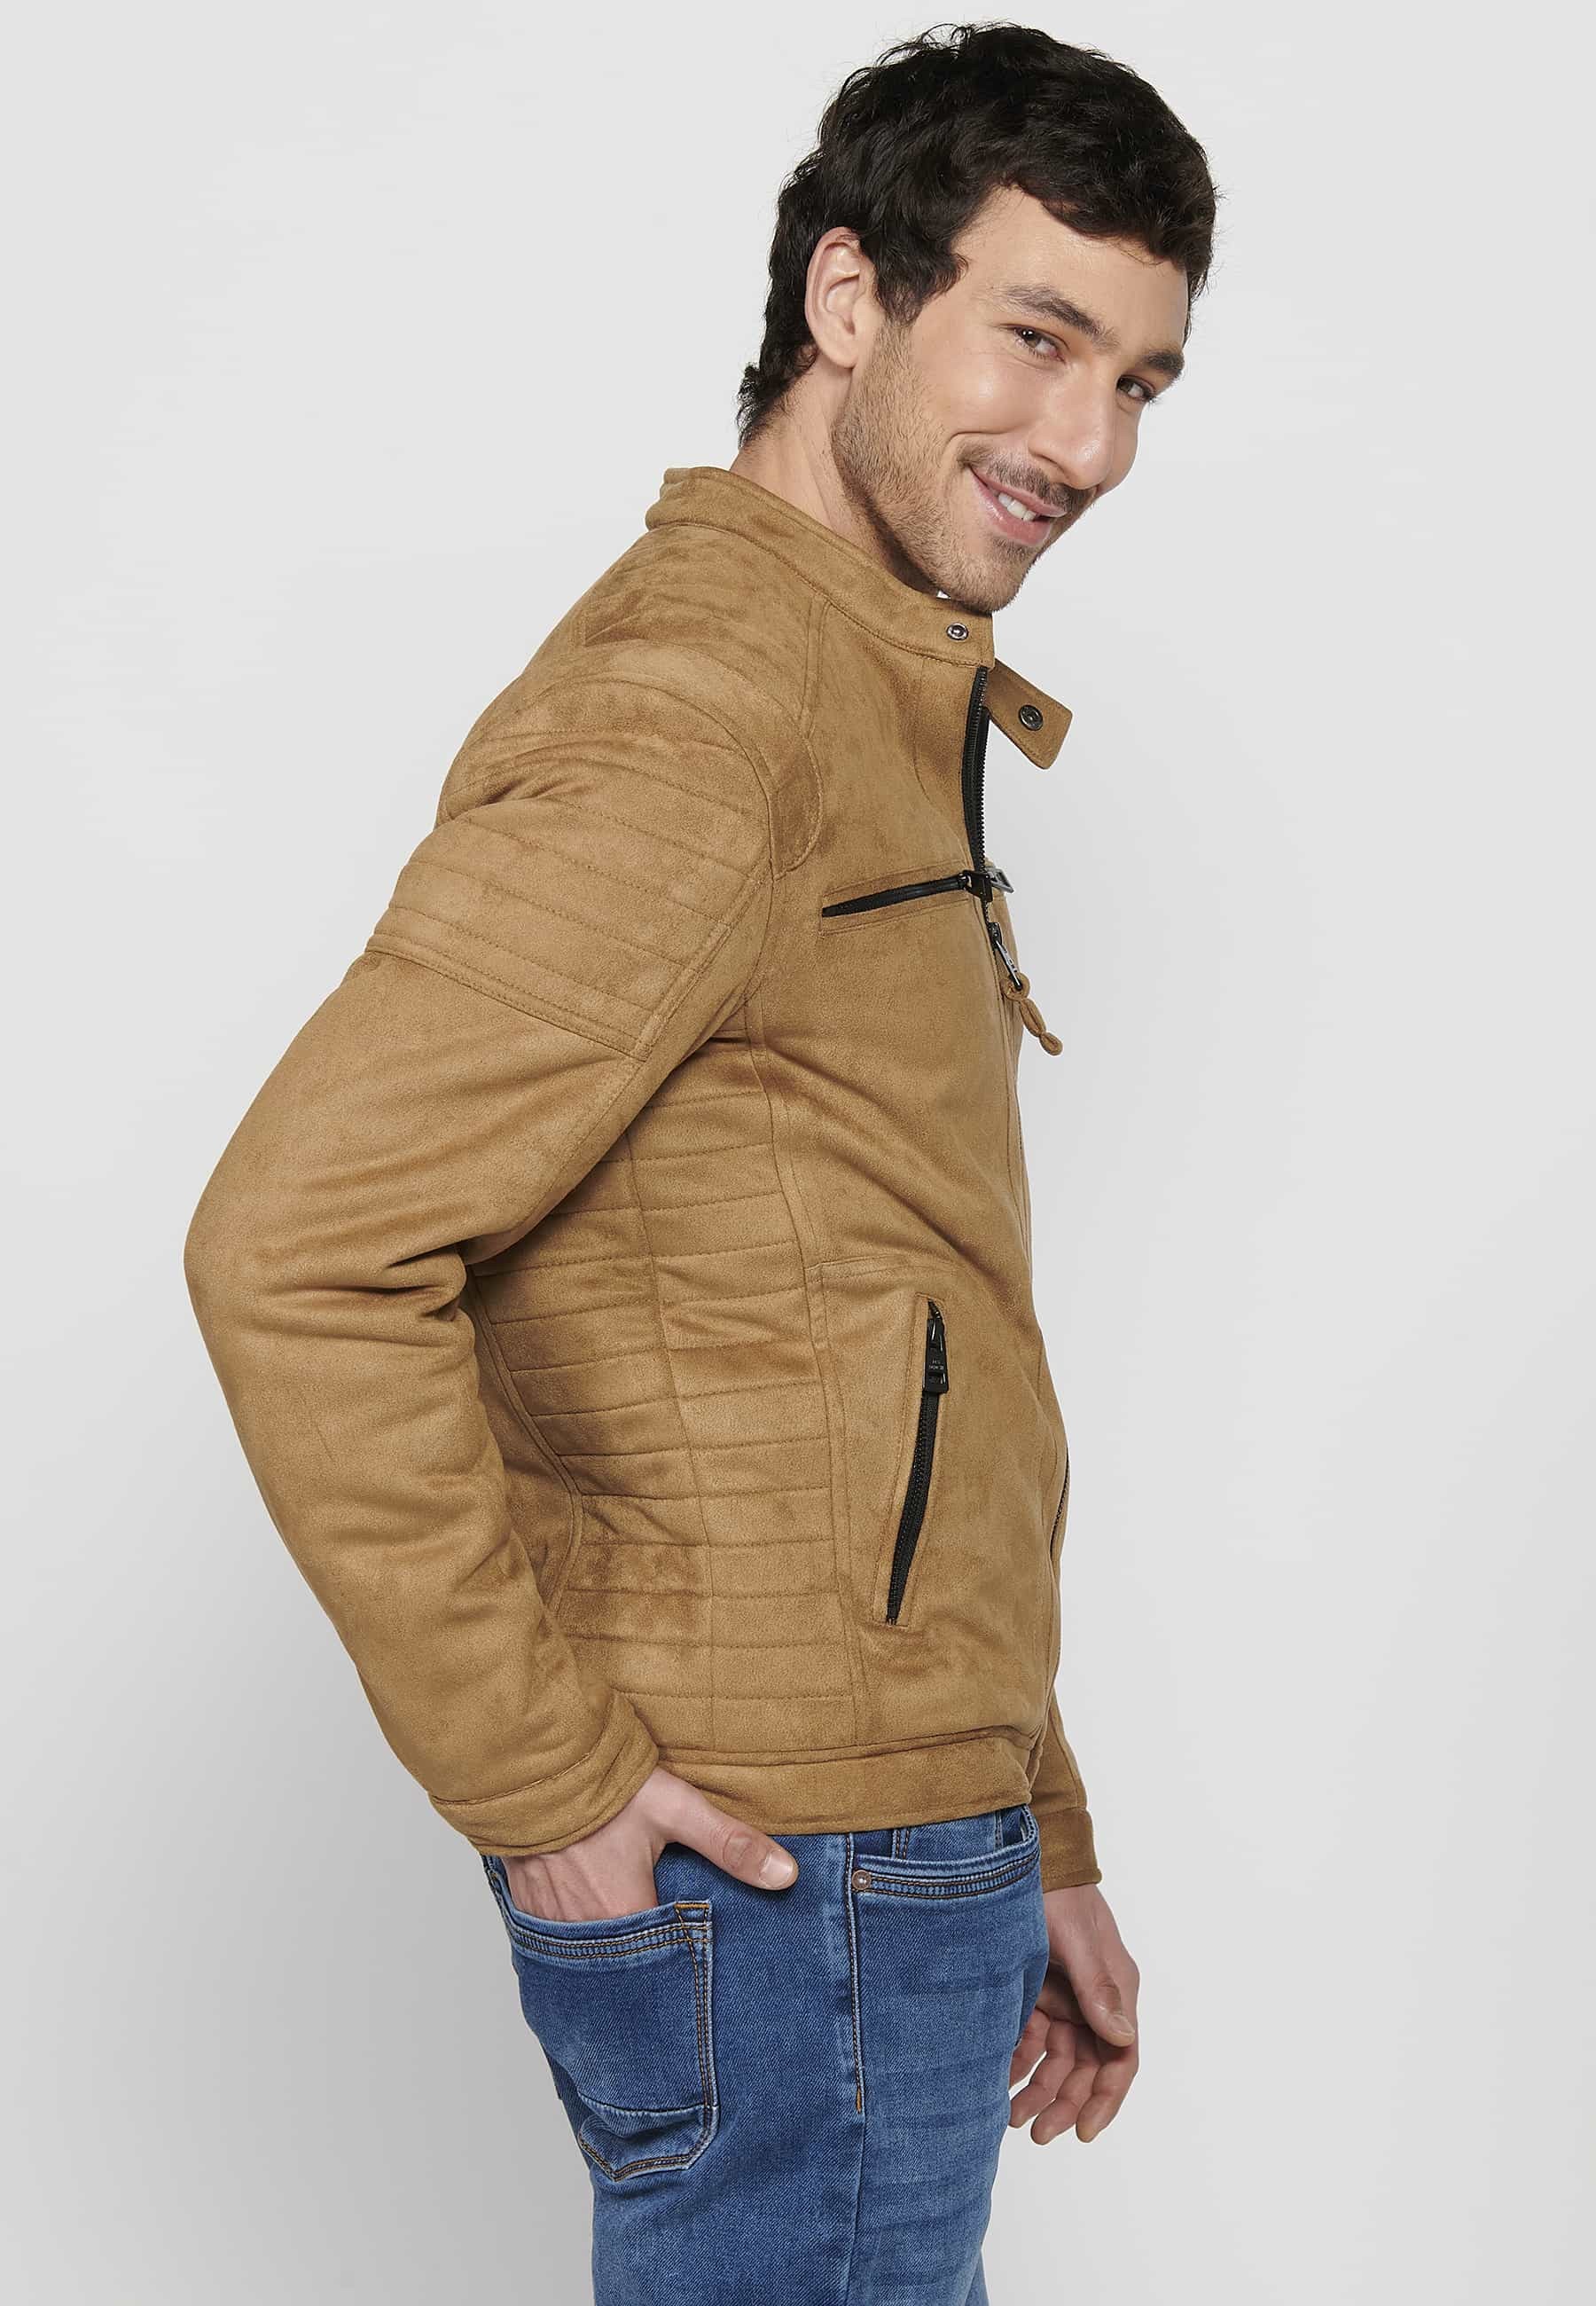 Men's Long Sleeve Jacket with Round Neck and Zipper Front Closure with Four Pockets in Tan Color 7